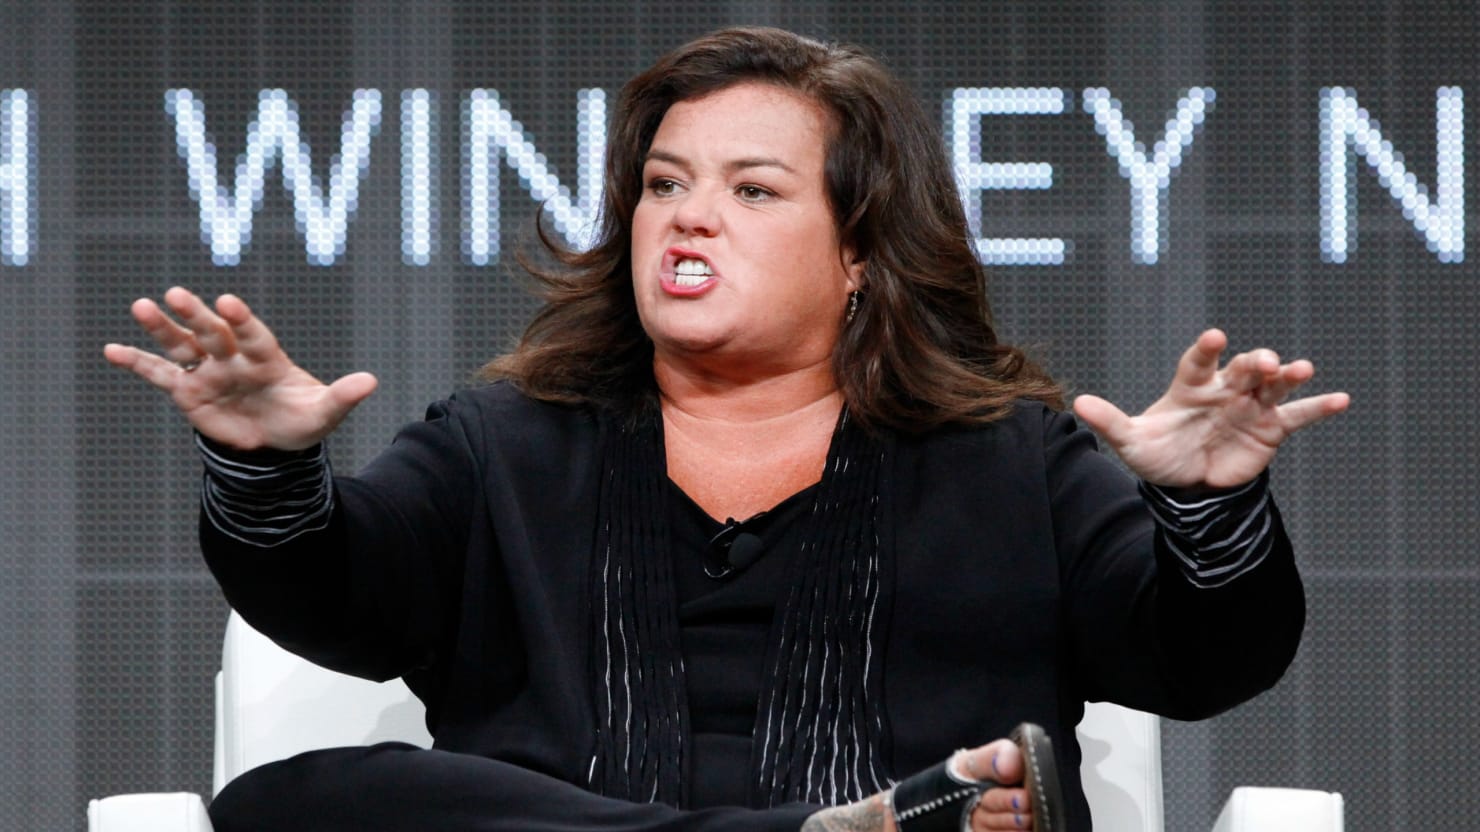 Rosie O'Donnell Ex Wants Drug Tests.